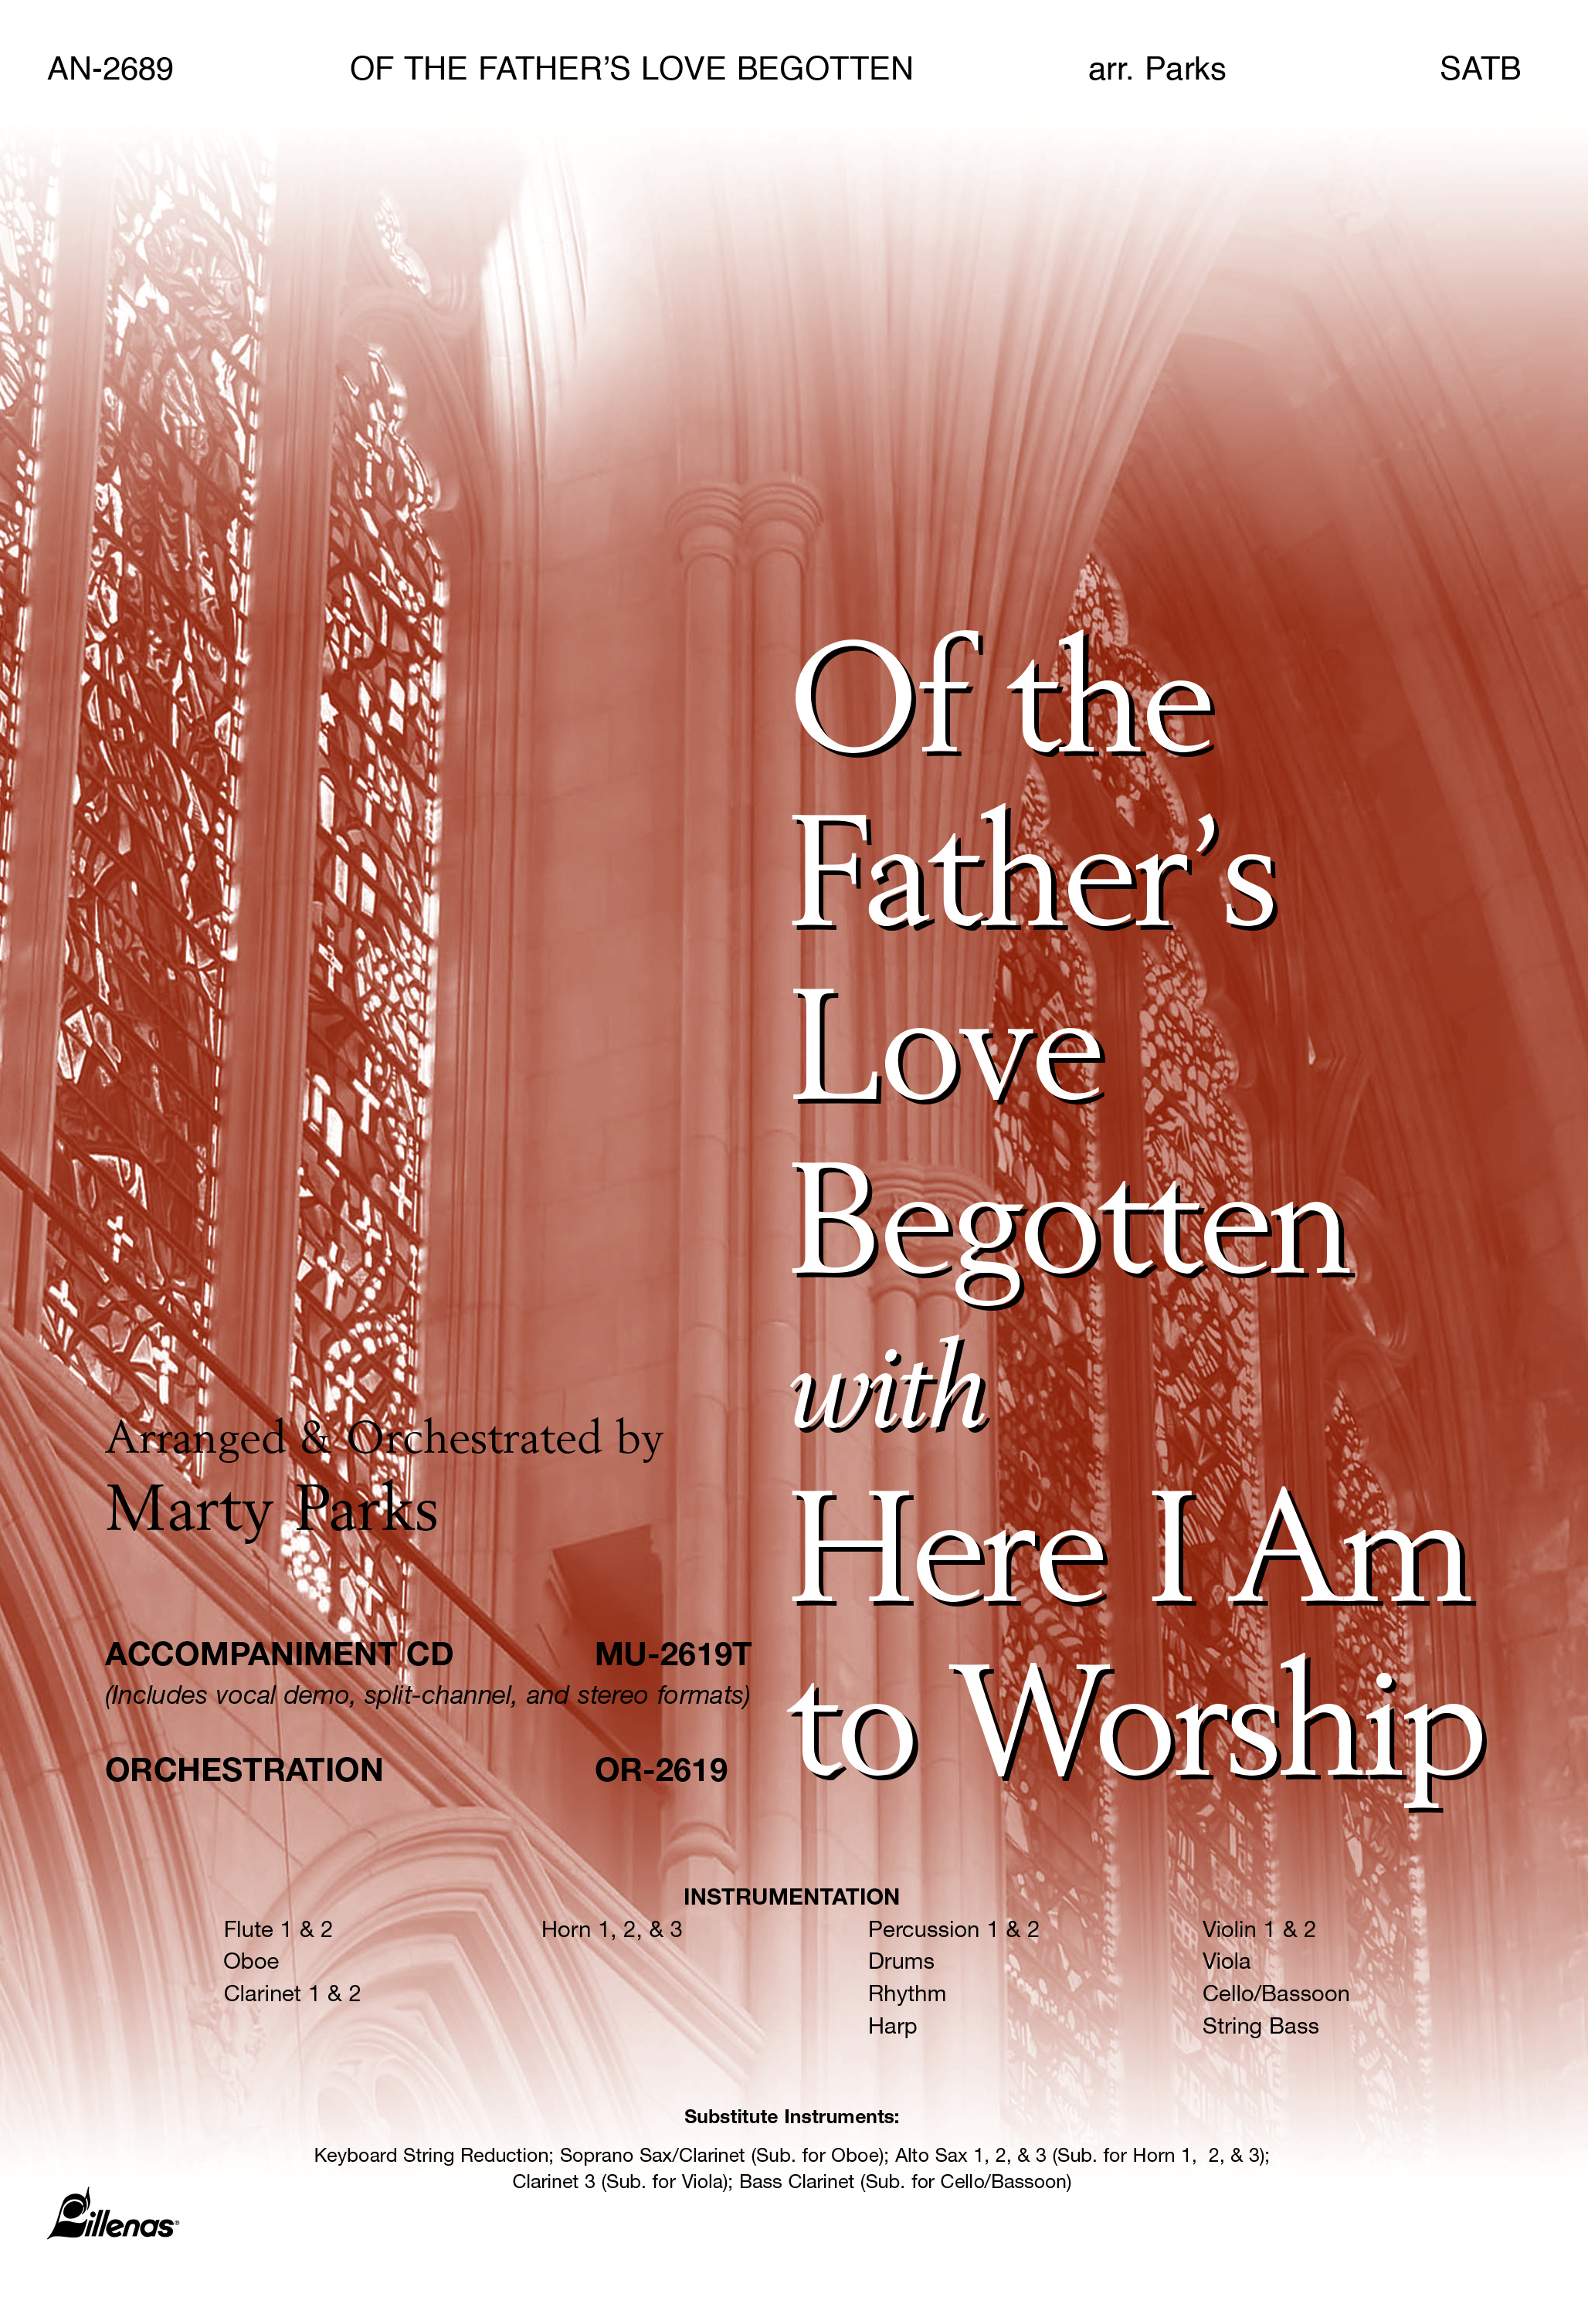 Of the Father's Love Begotten with Here I Am to Worship